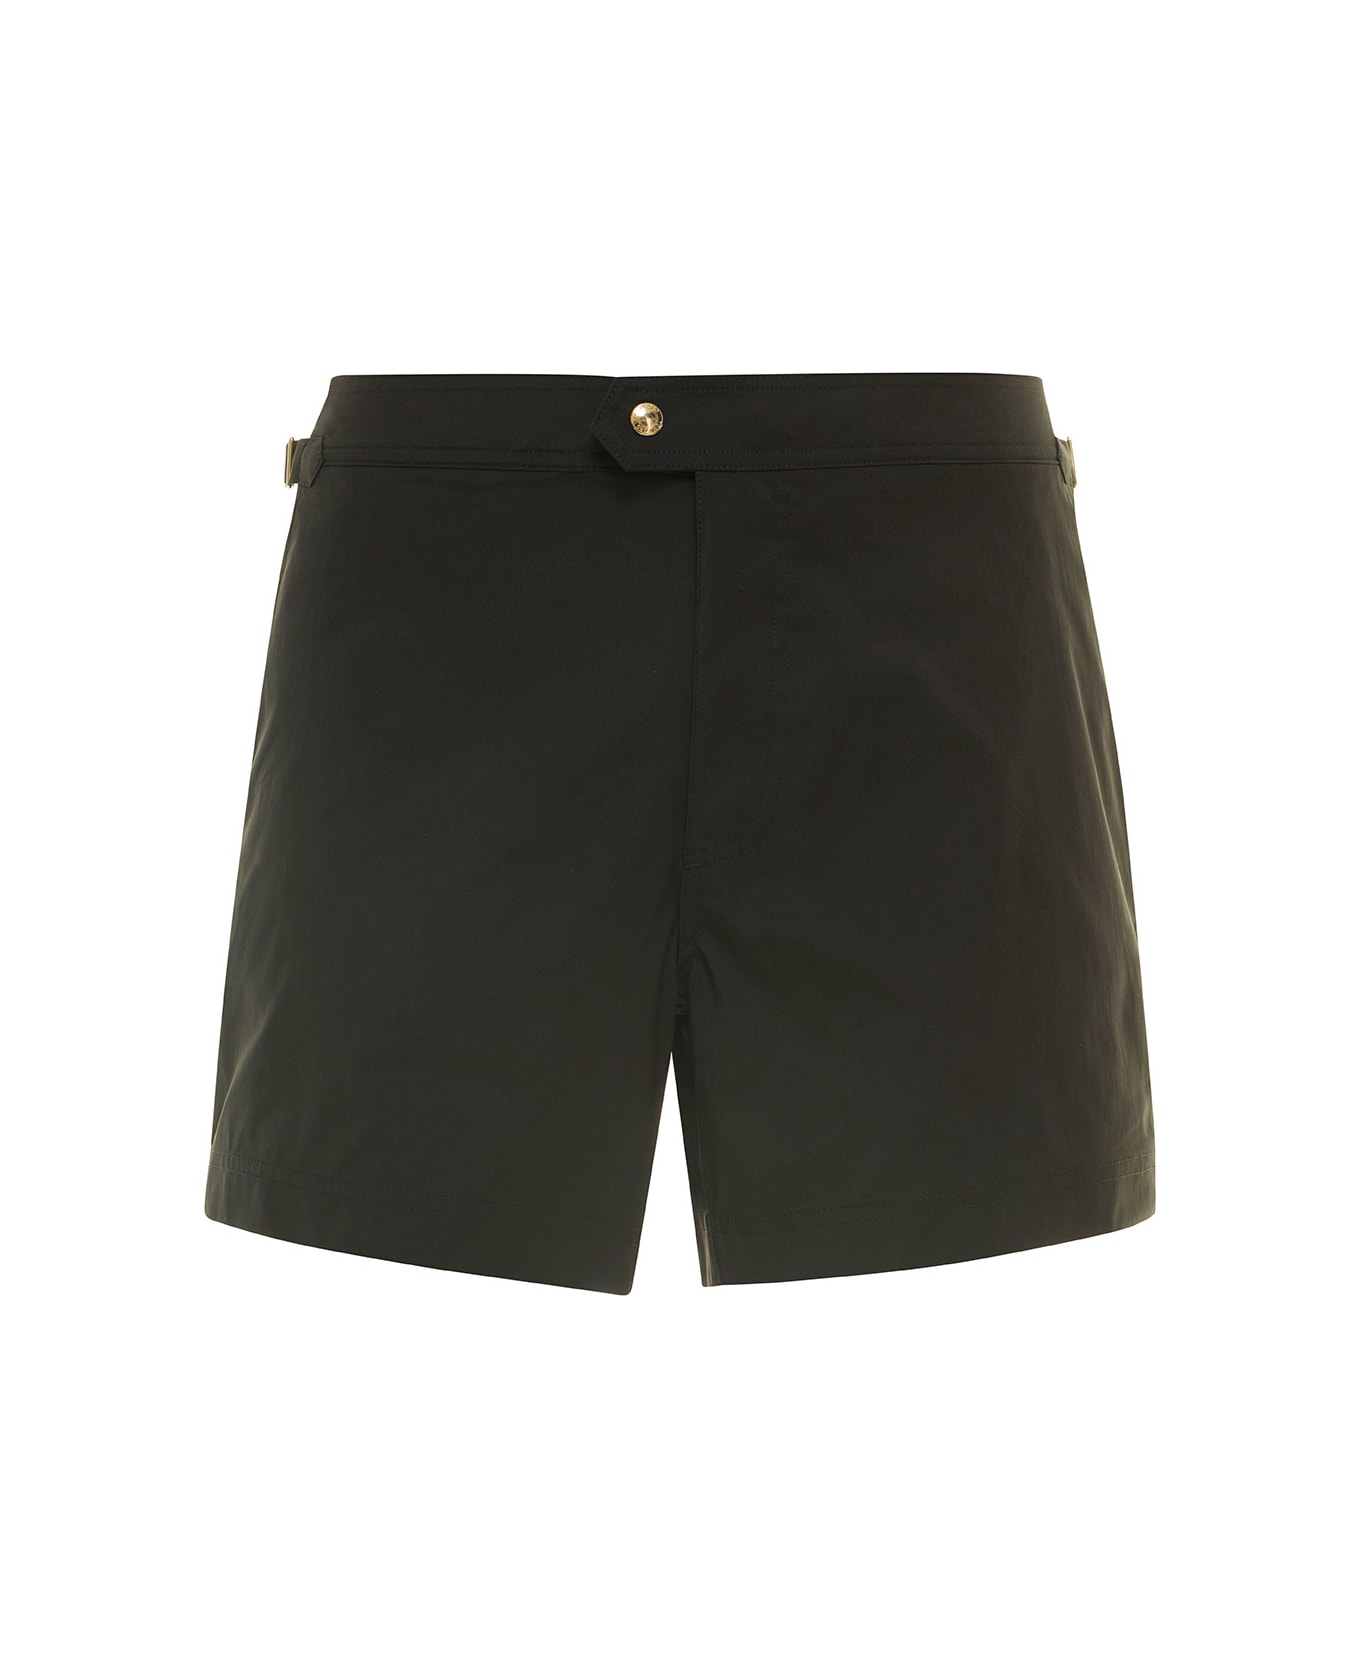 Tom Ford Black Swim Shorts With Side Buckle In Polyester Man - BLACK